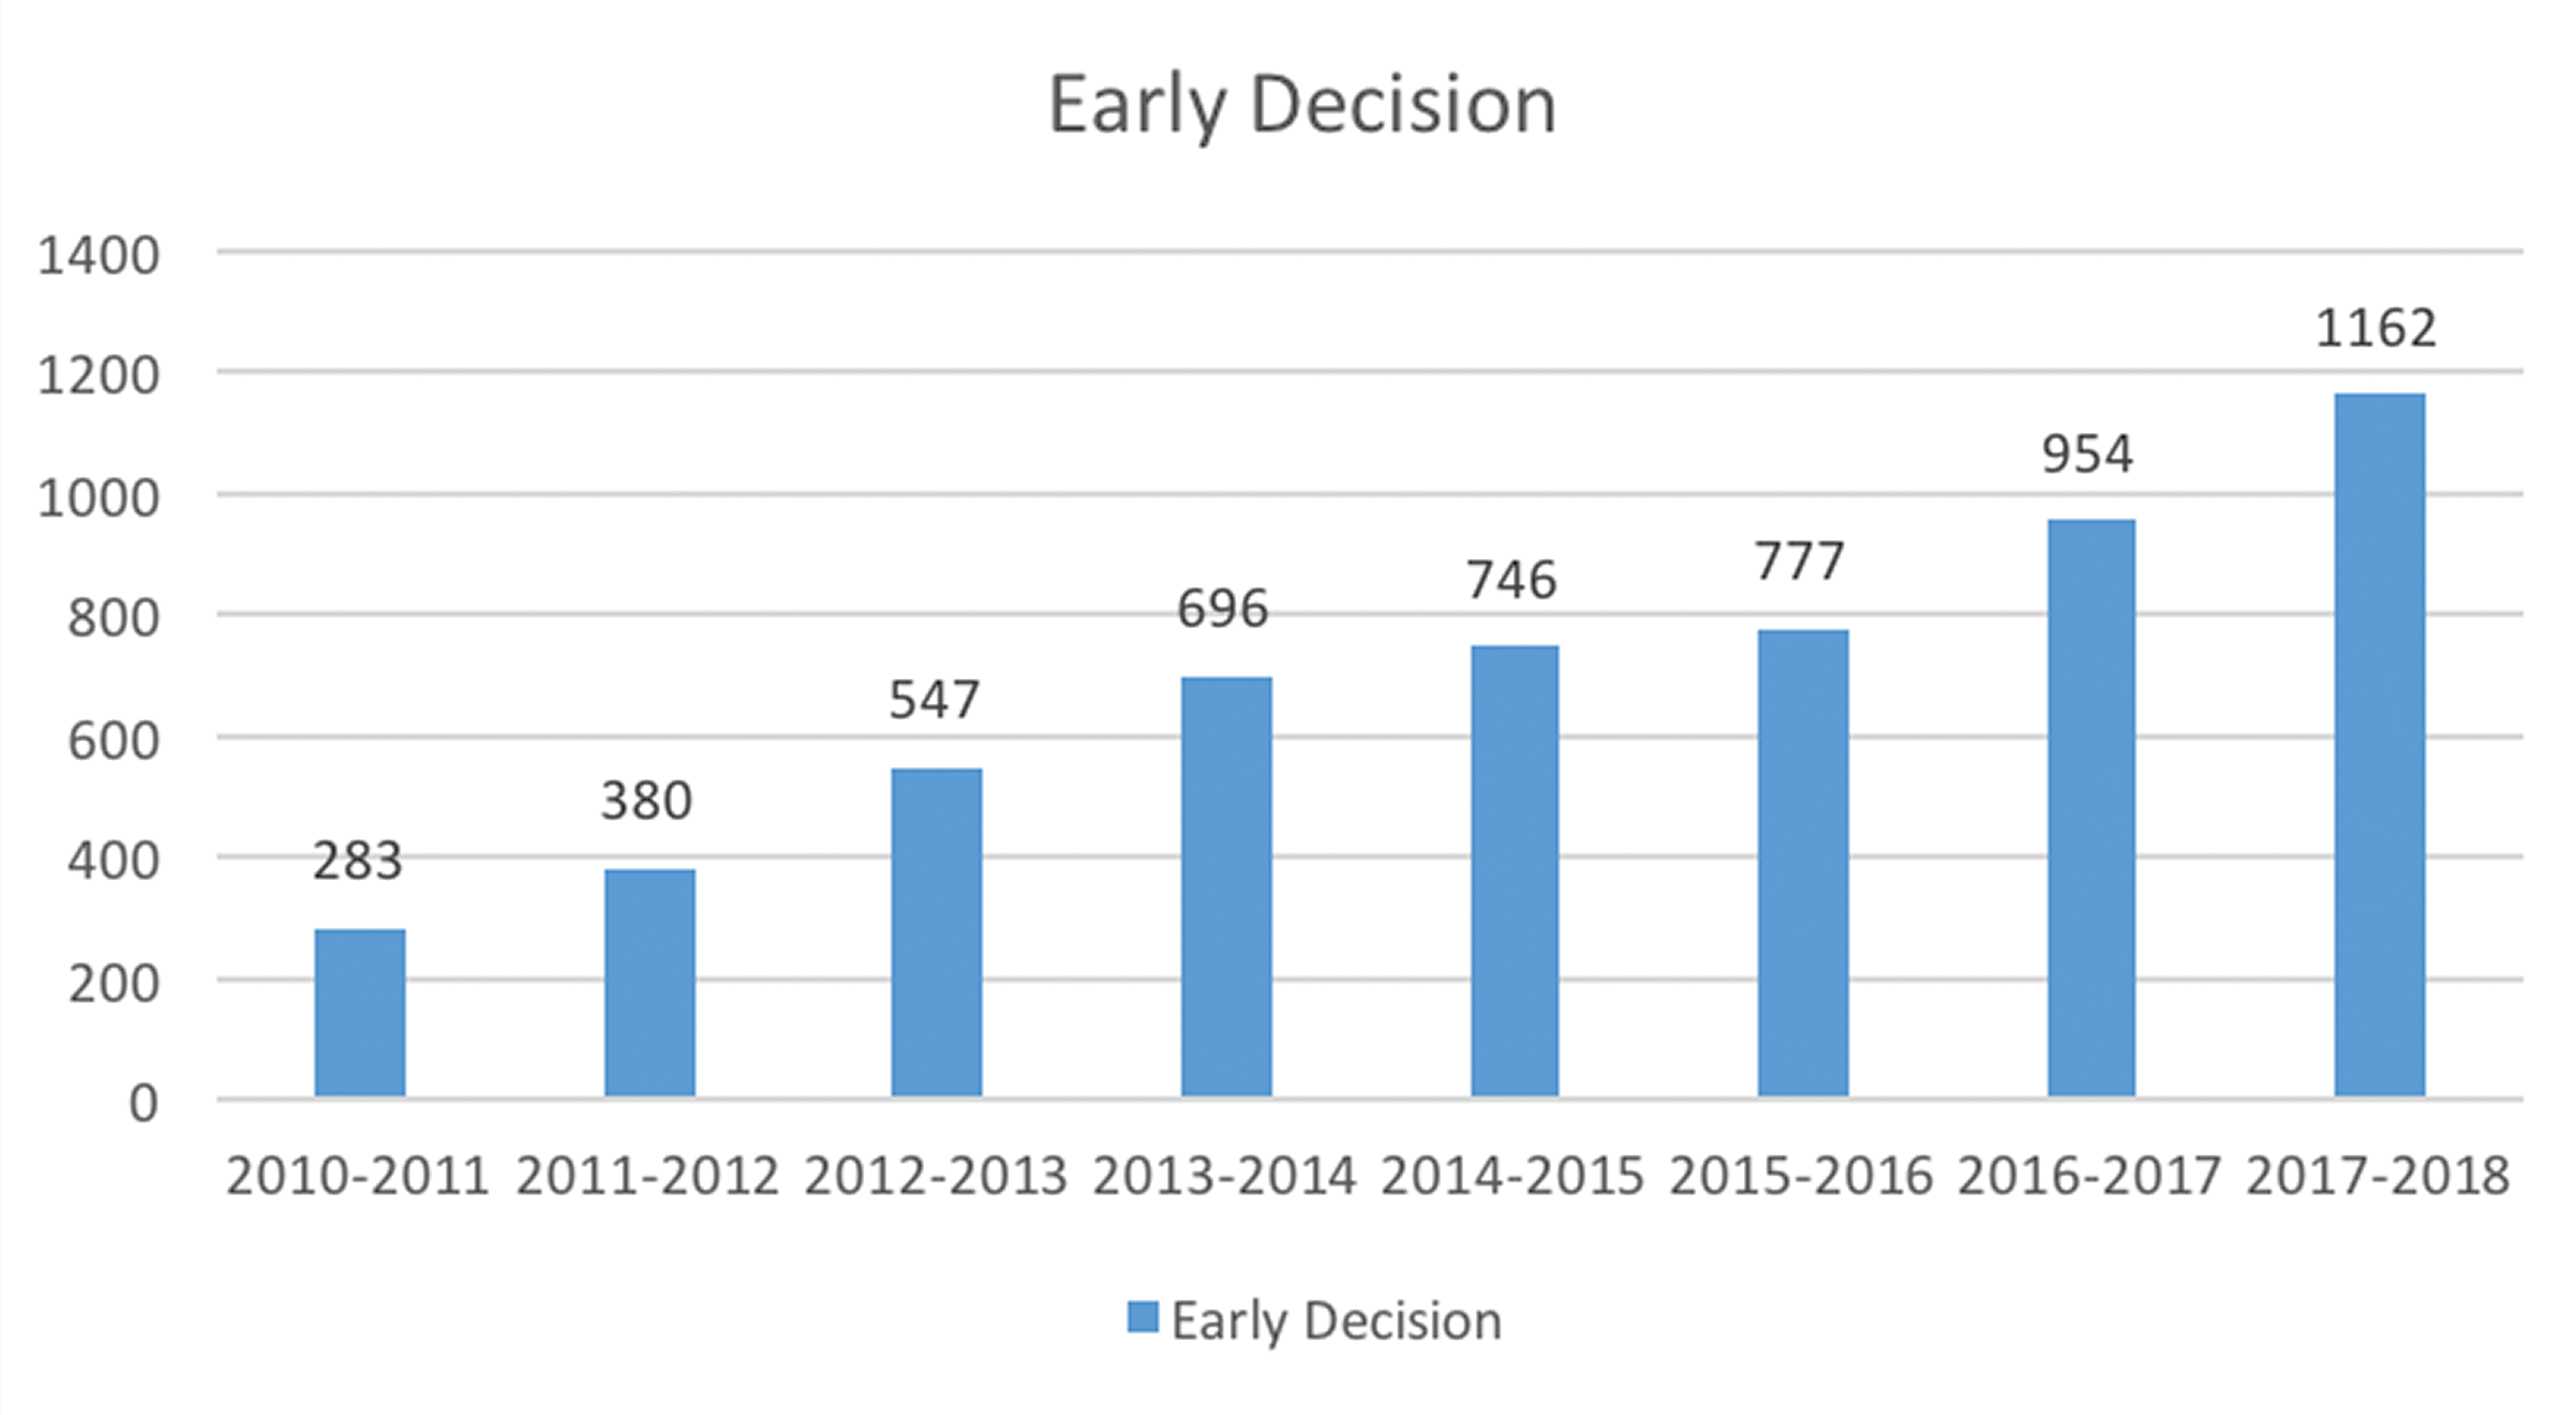 Record set for early decision program